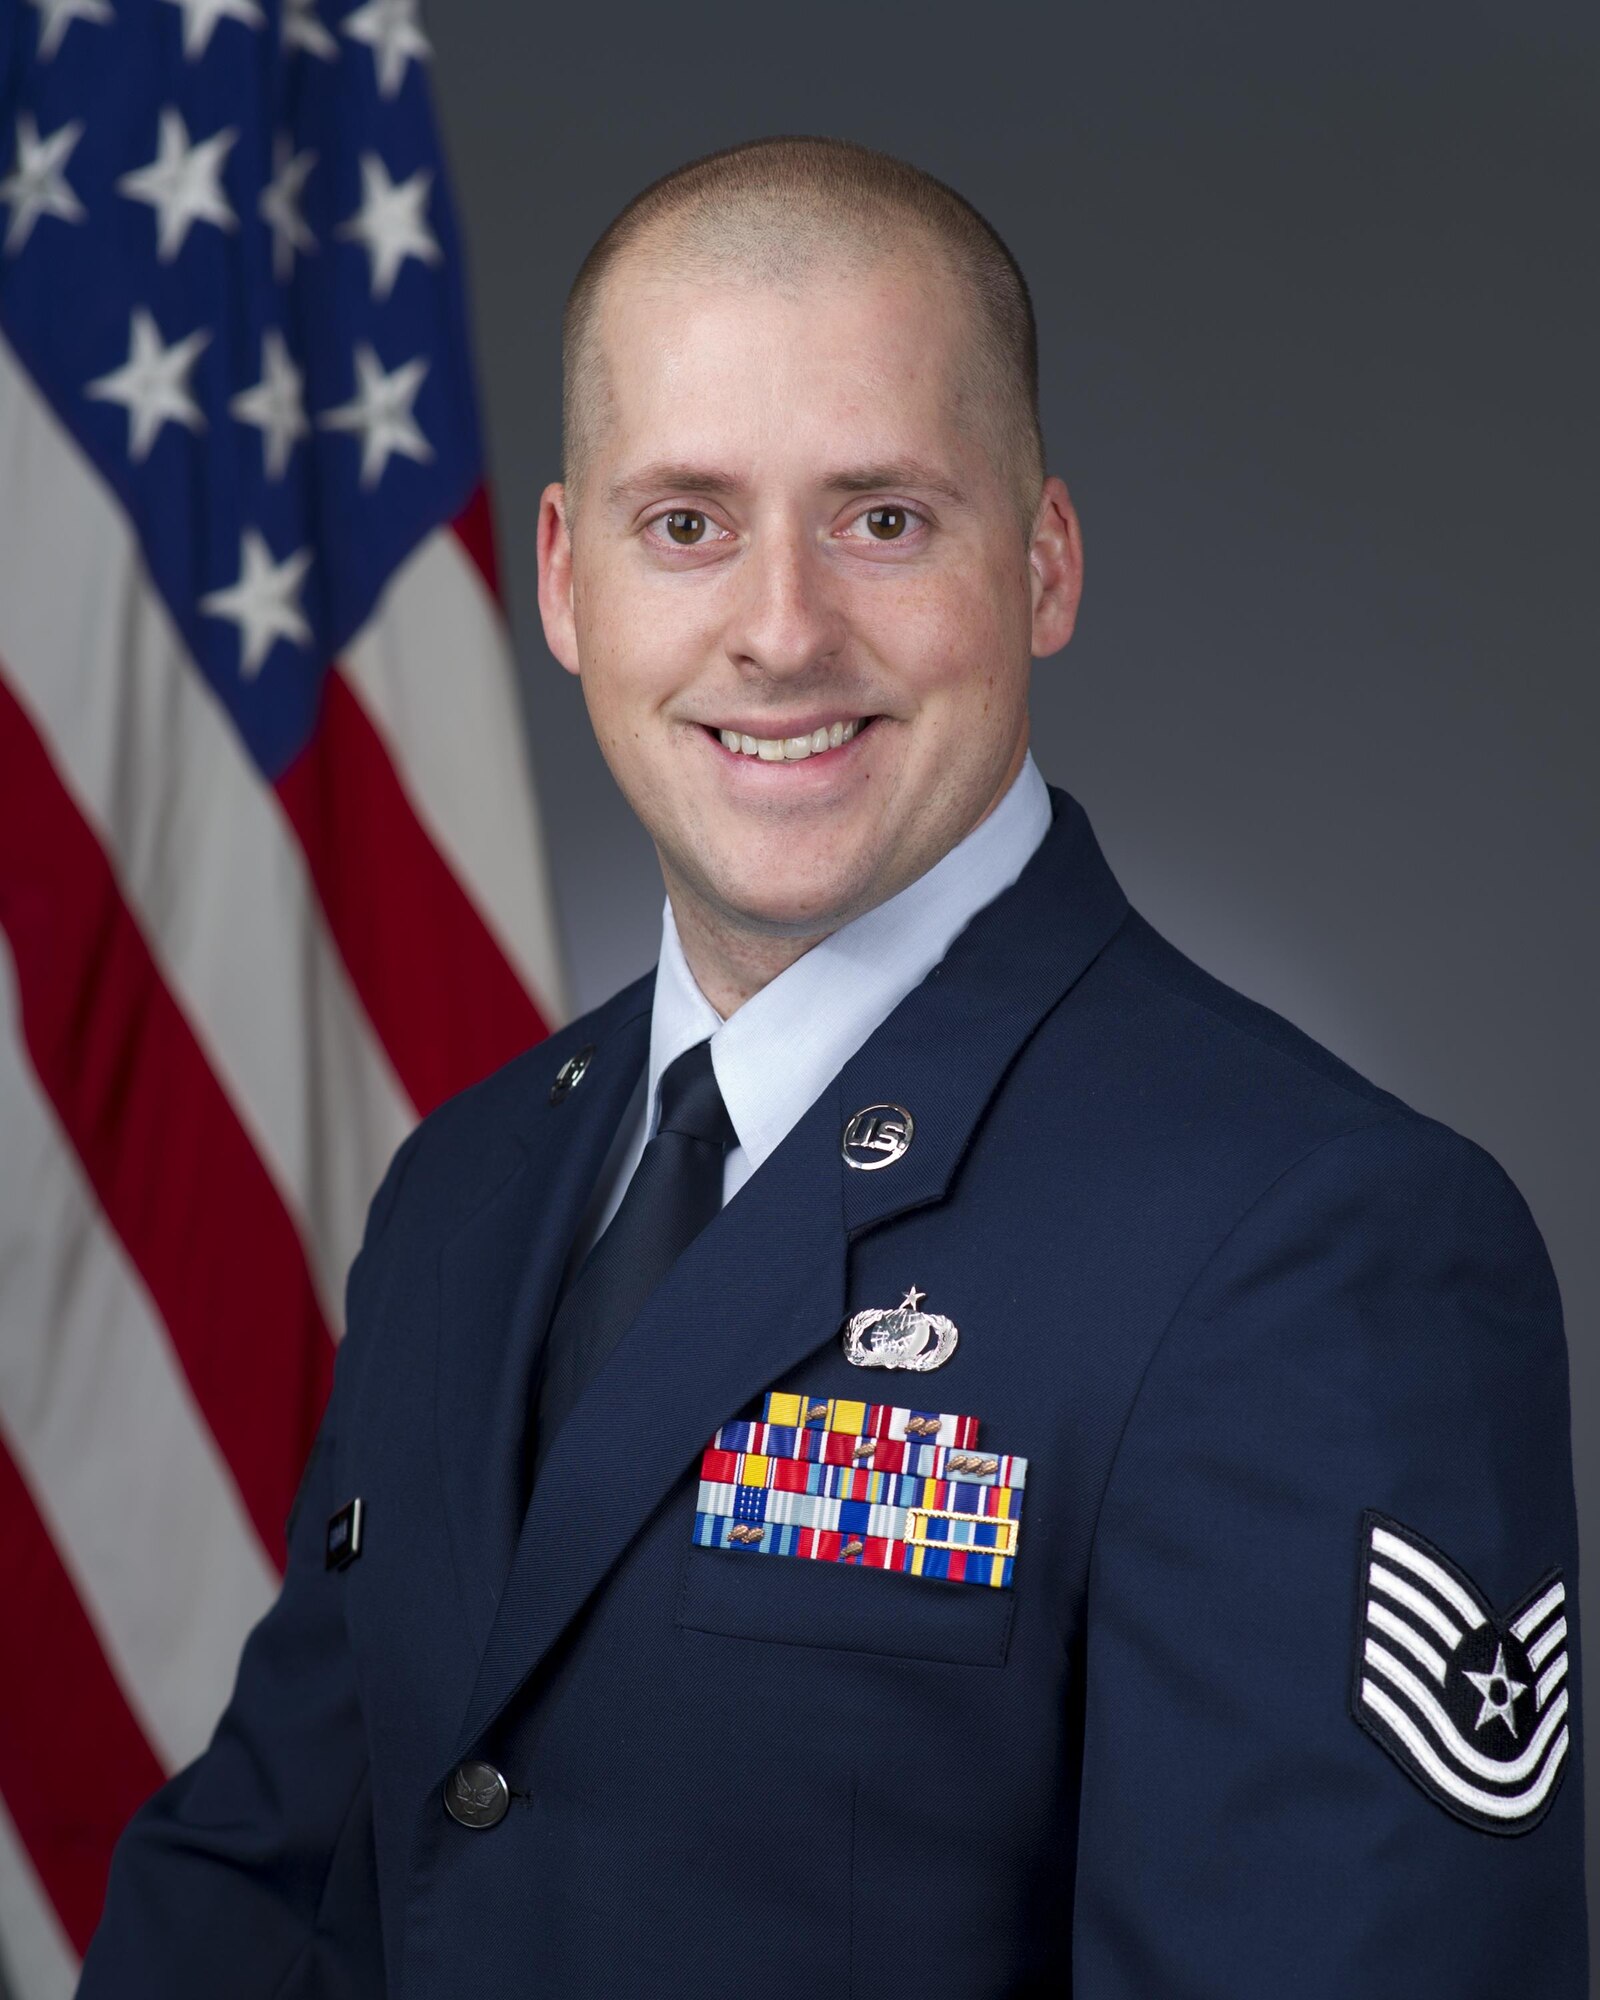 Tech. Sgt. James Hodgman, 60th Air Mobility Wing, shares what being a military father means to him and encourages all military parents to cherish every moment with their children. (U.S. Air Force photo). 